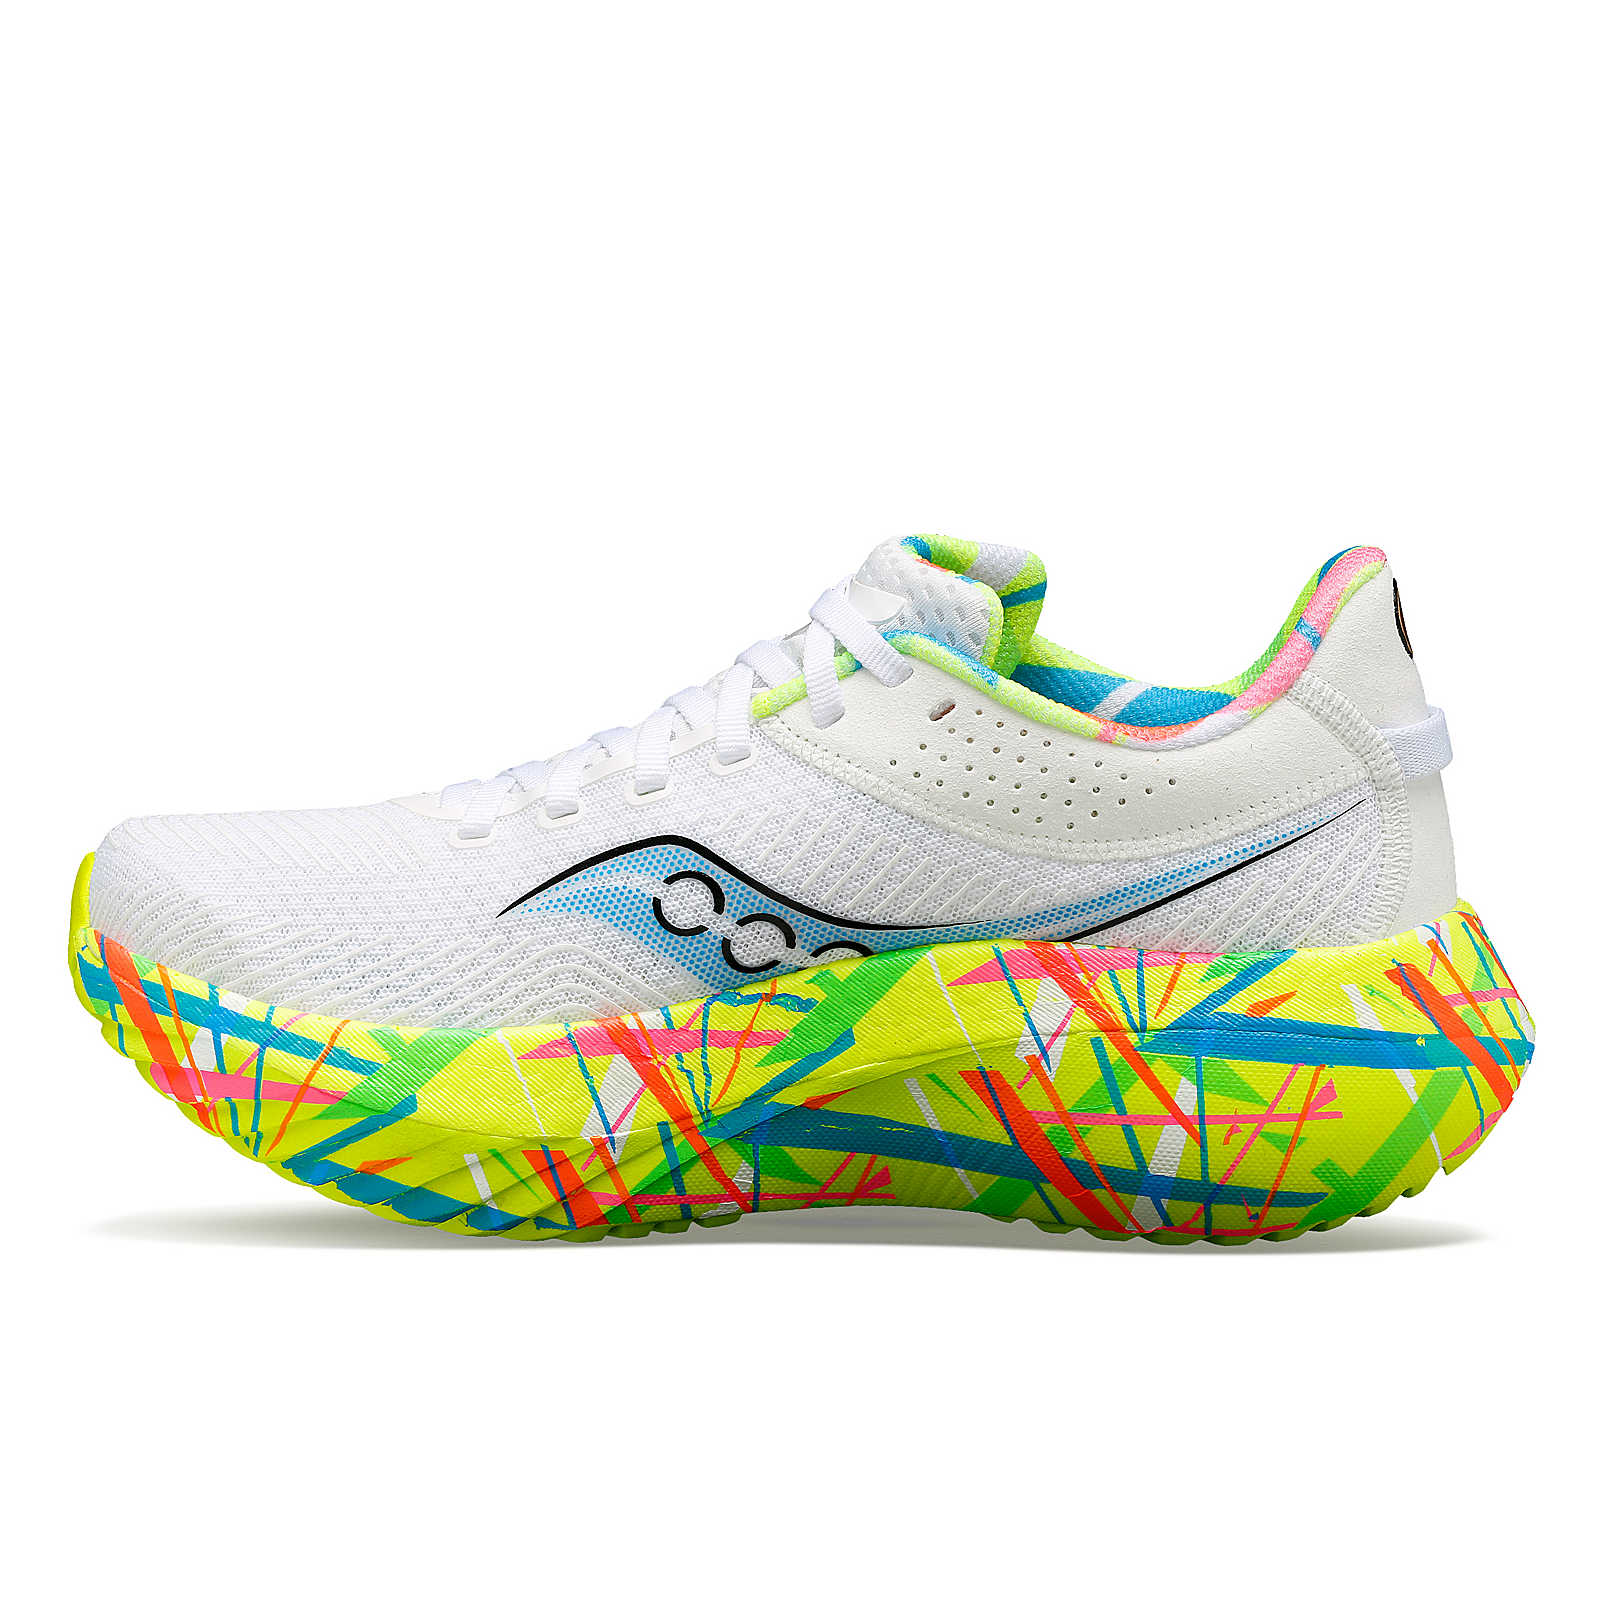 The midsole of this Women's Kinvara Pro is lots of bright neon colors